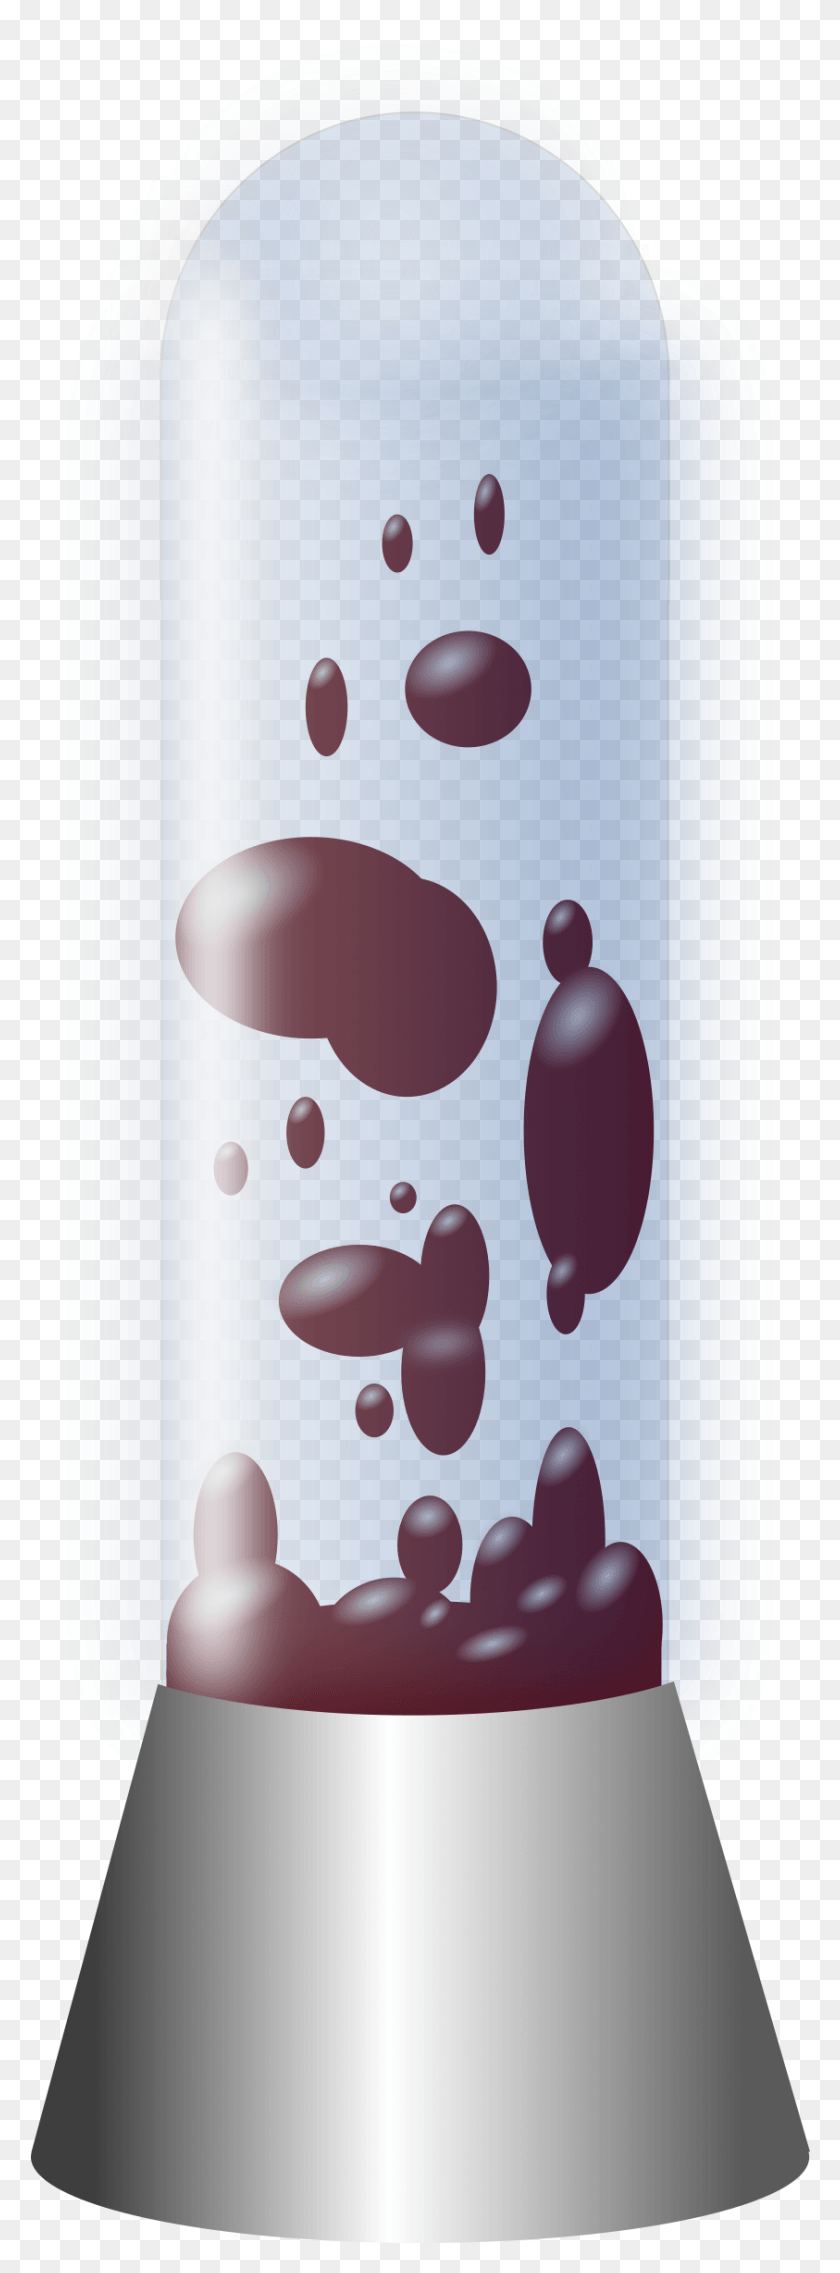 843x2392 This Free Icons Design Of Olivierod Make An Easy Lava Lamp, Tin, Can, Spray Lata Hd Png Descargar